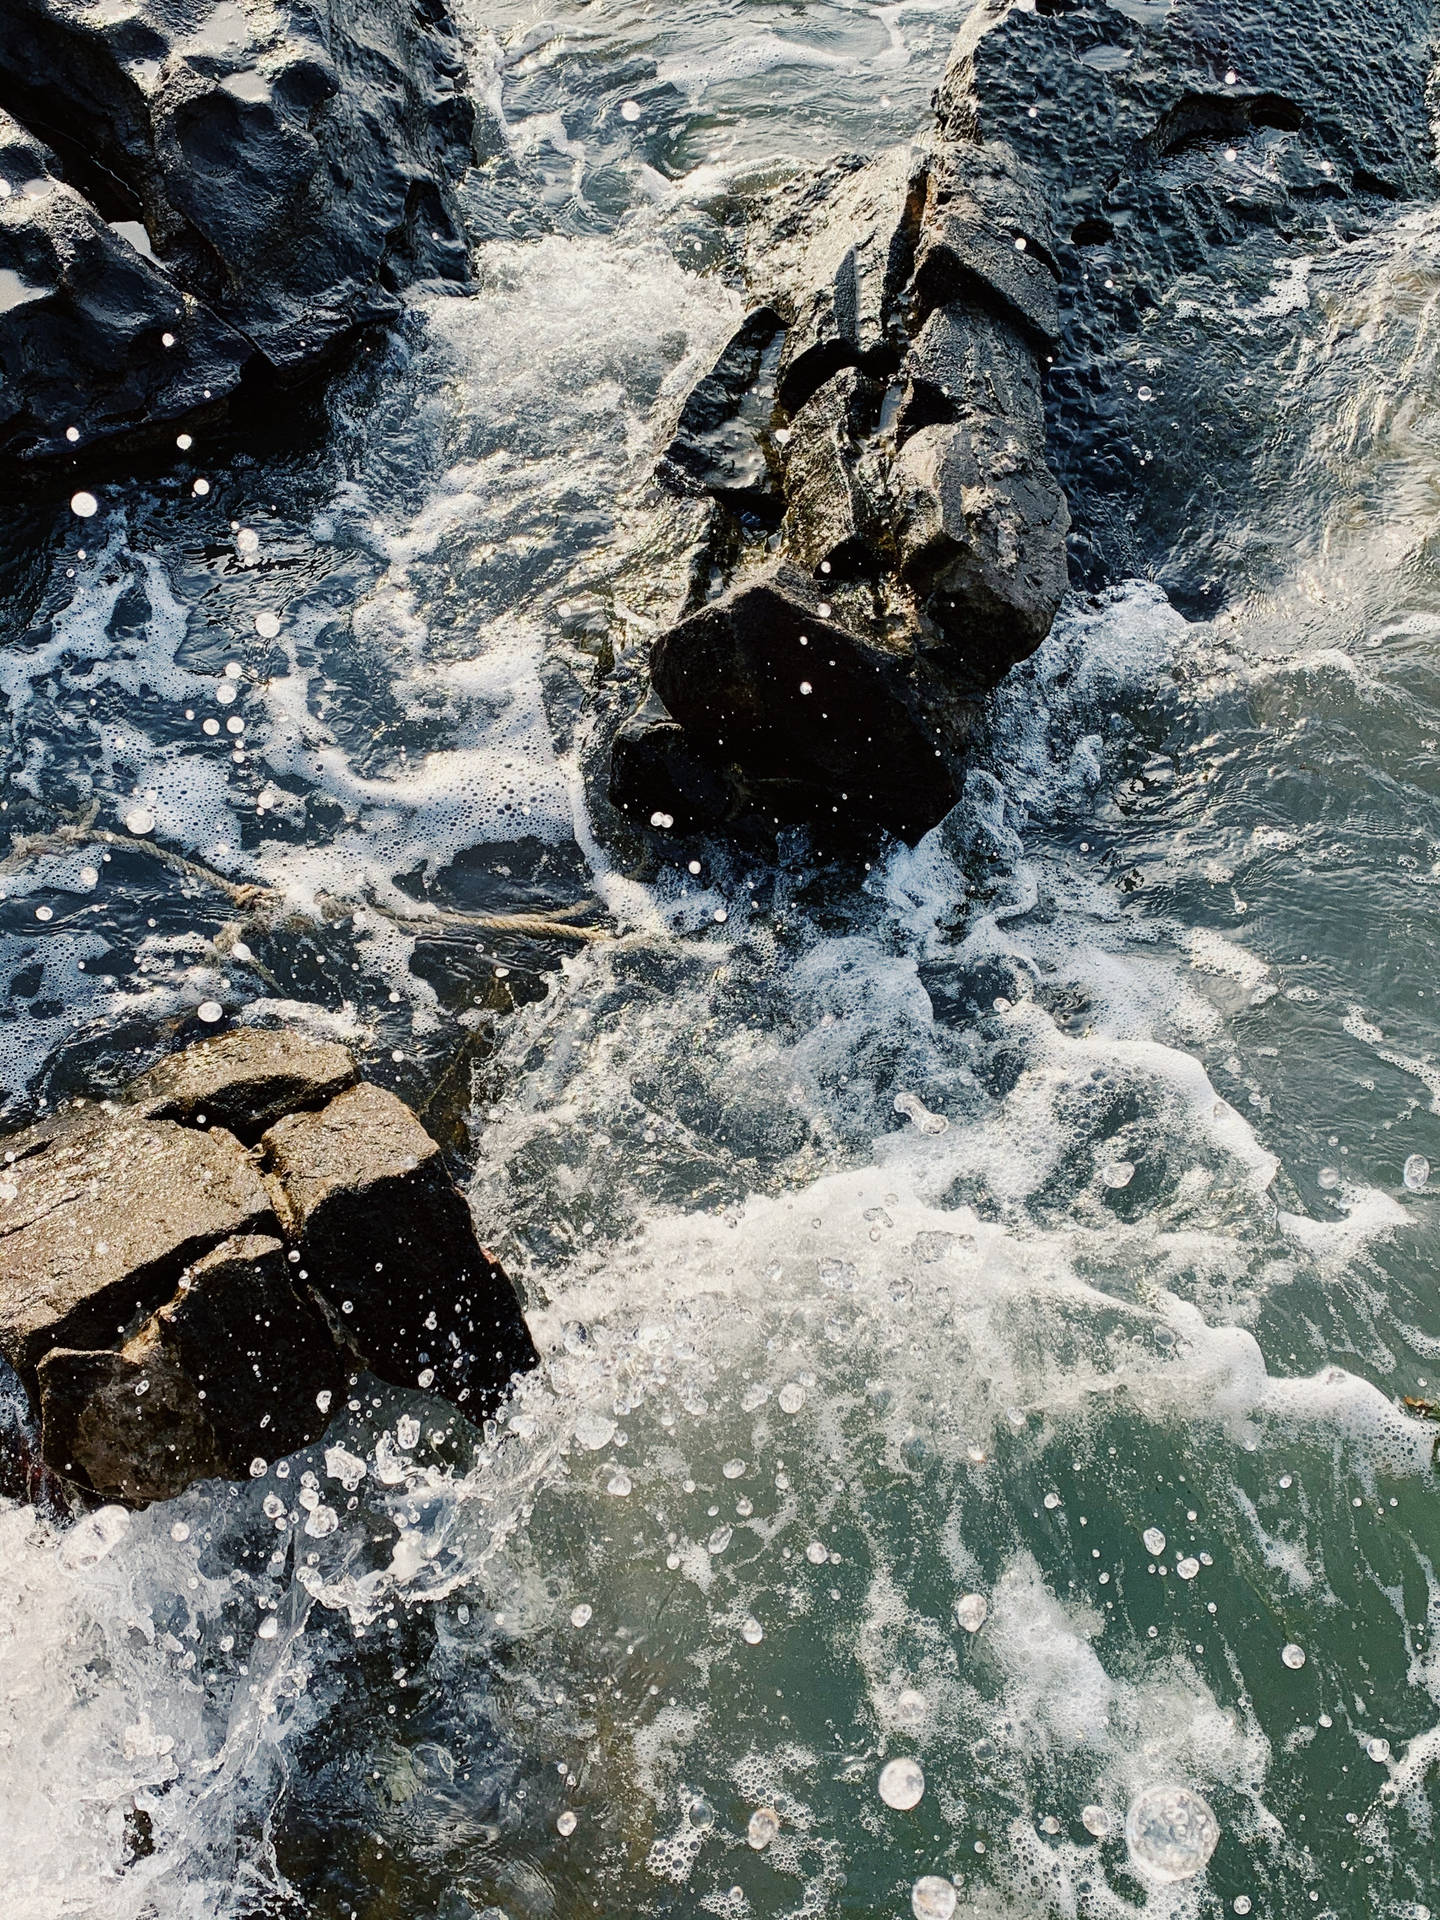 4k Iphone 6 Plus Rocky Waters Background